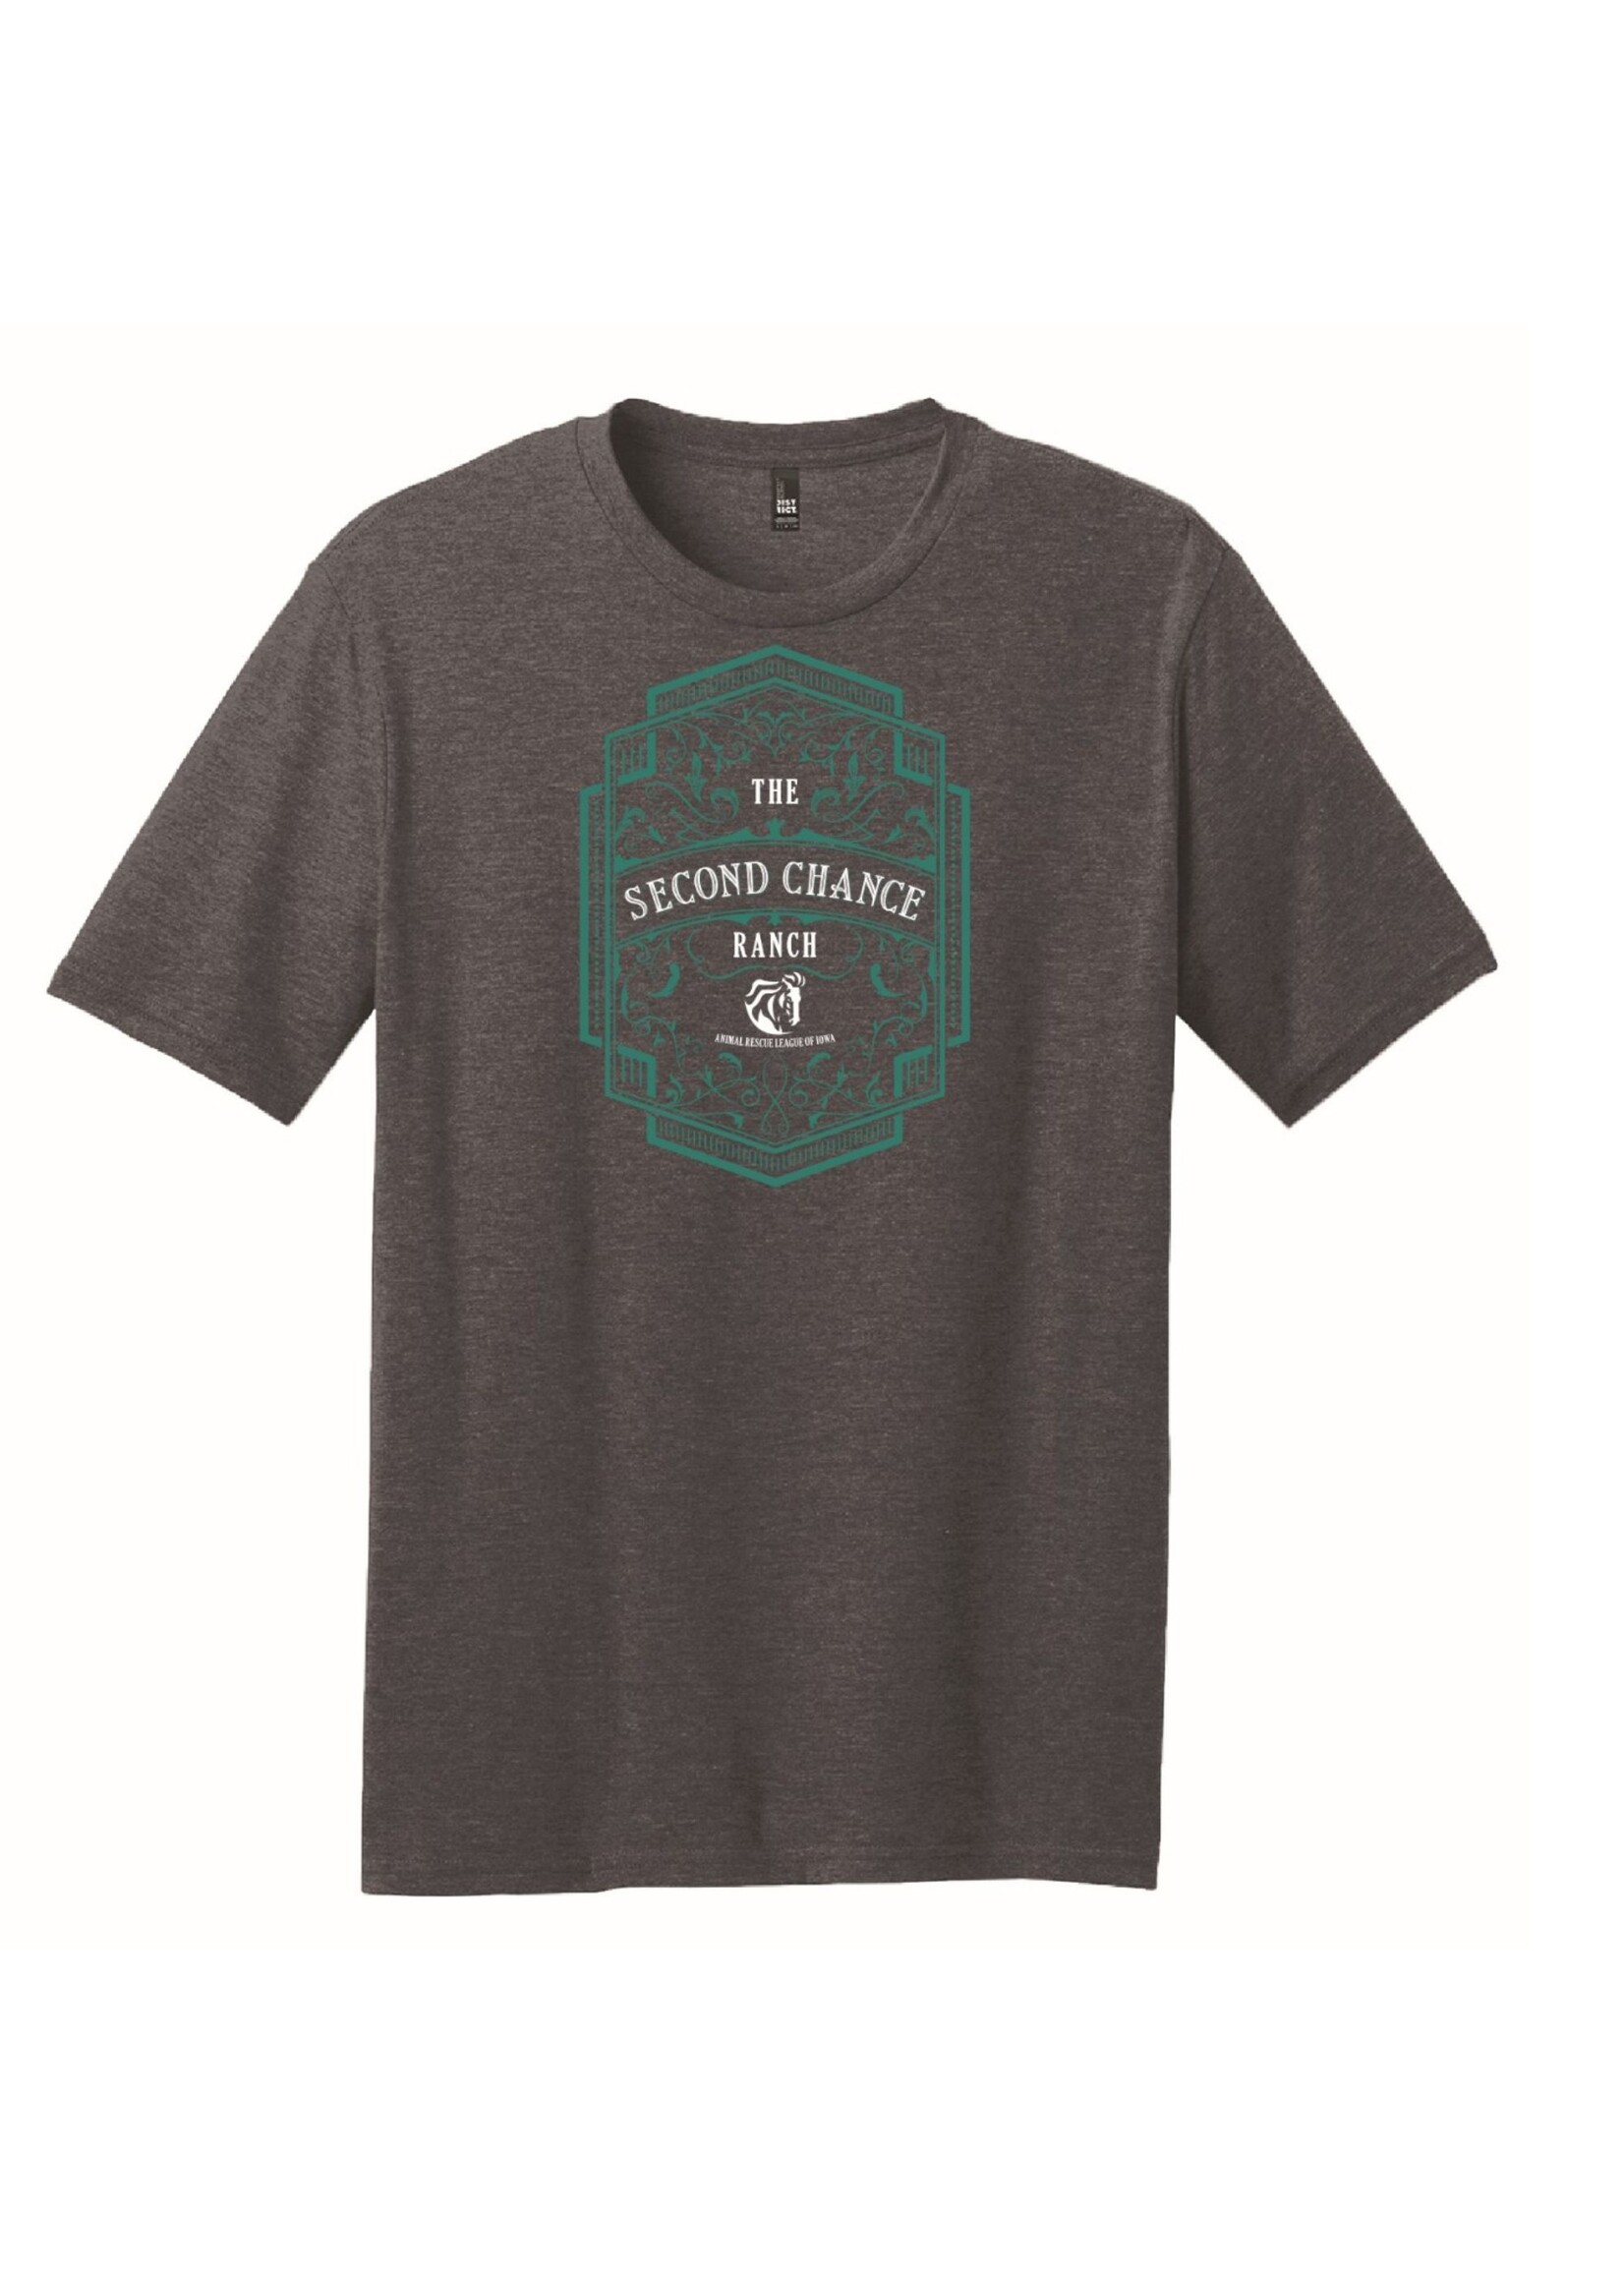 New Second Chance Ranch T-Shirts